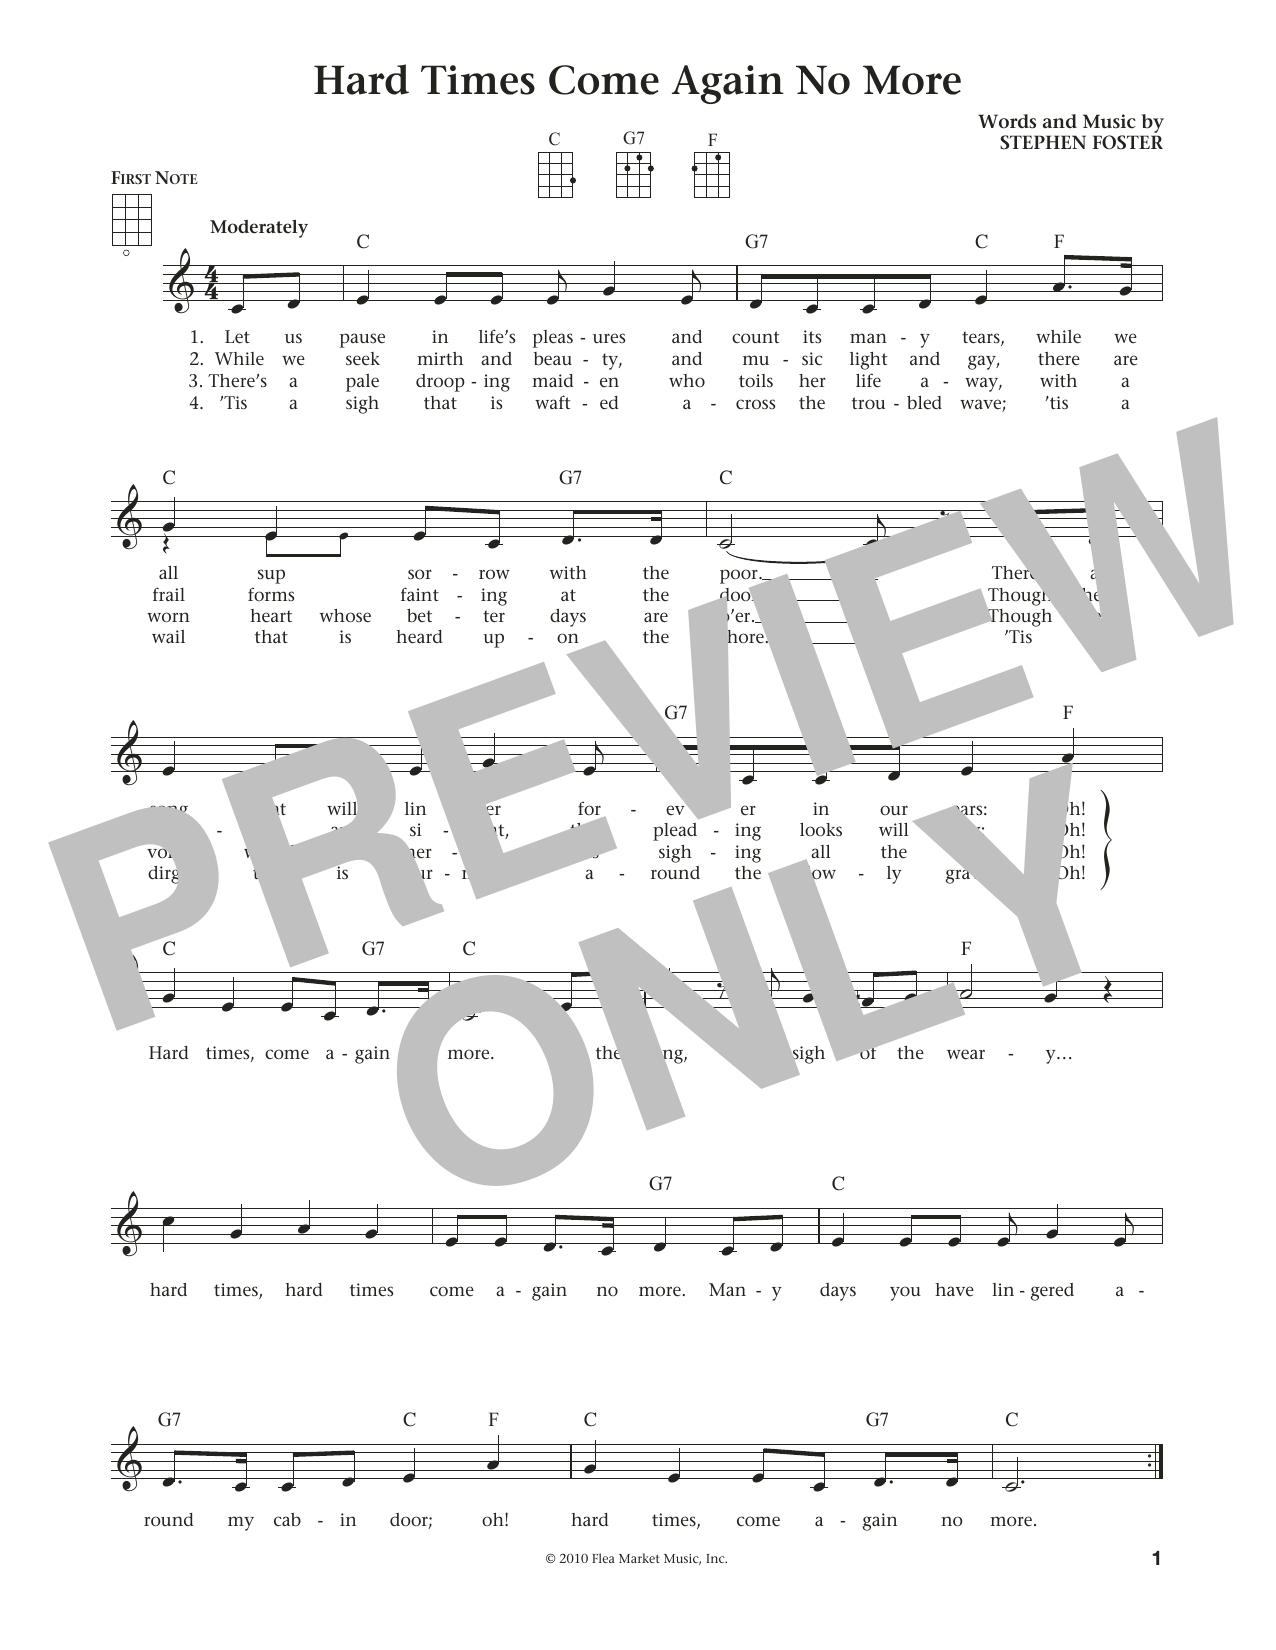 Download Stephen C. Foster Hard Times Come Again No More (from The Sheet Music